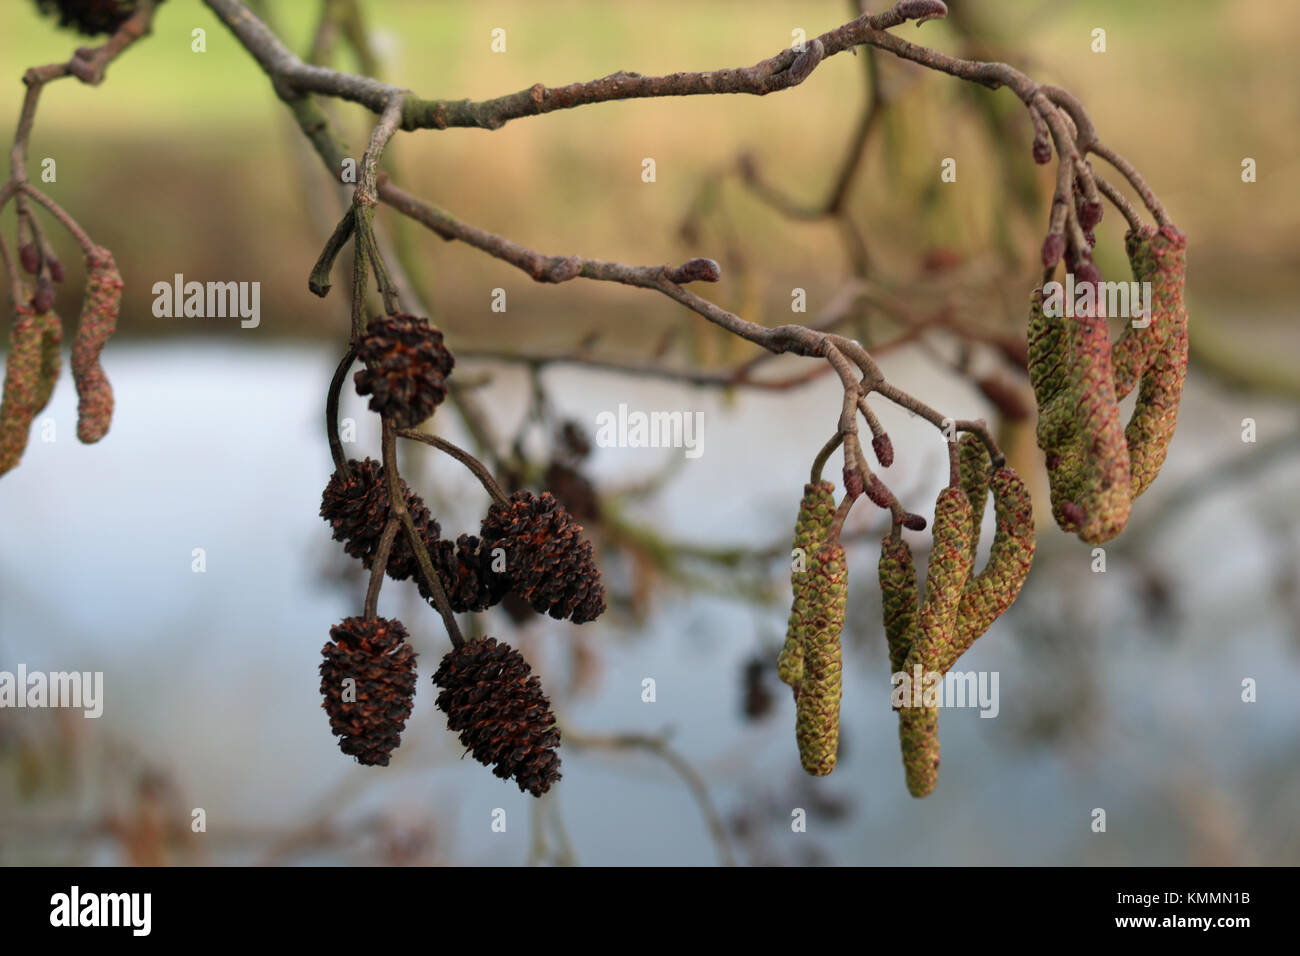 Alder tree (Alnus glutinosa) cones and flowers at the end of a small branch with a blurred background. Stock Photo